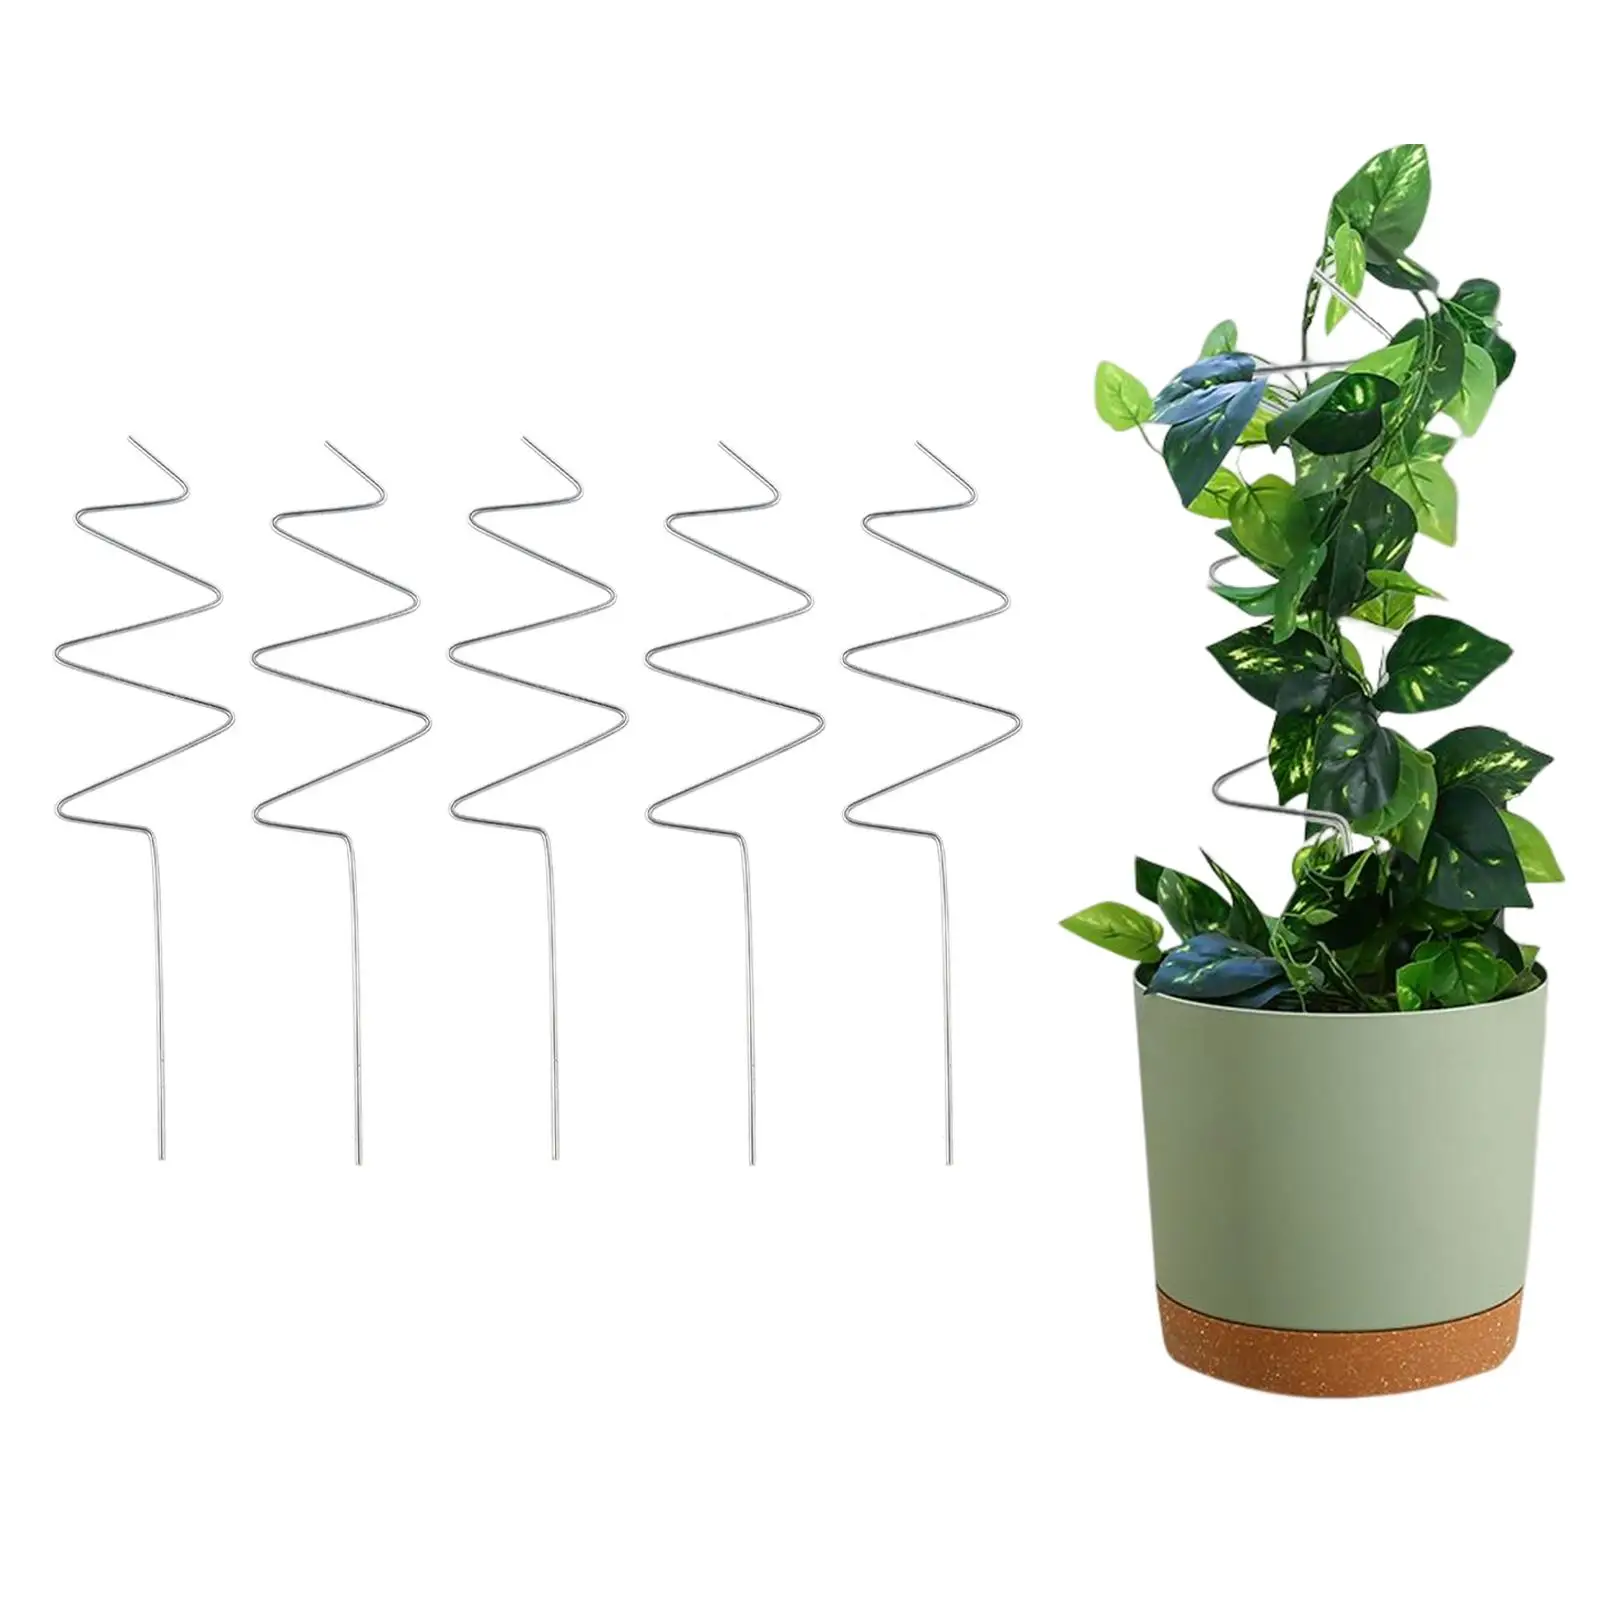 5 Pieces Vine Climbing Rack Plant Metal Climbing Trellis Space Saver Flower Stand for Climbing Plant Outdoor Flowers Vegetables